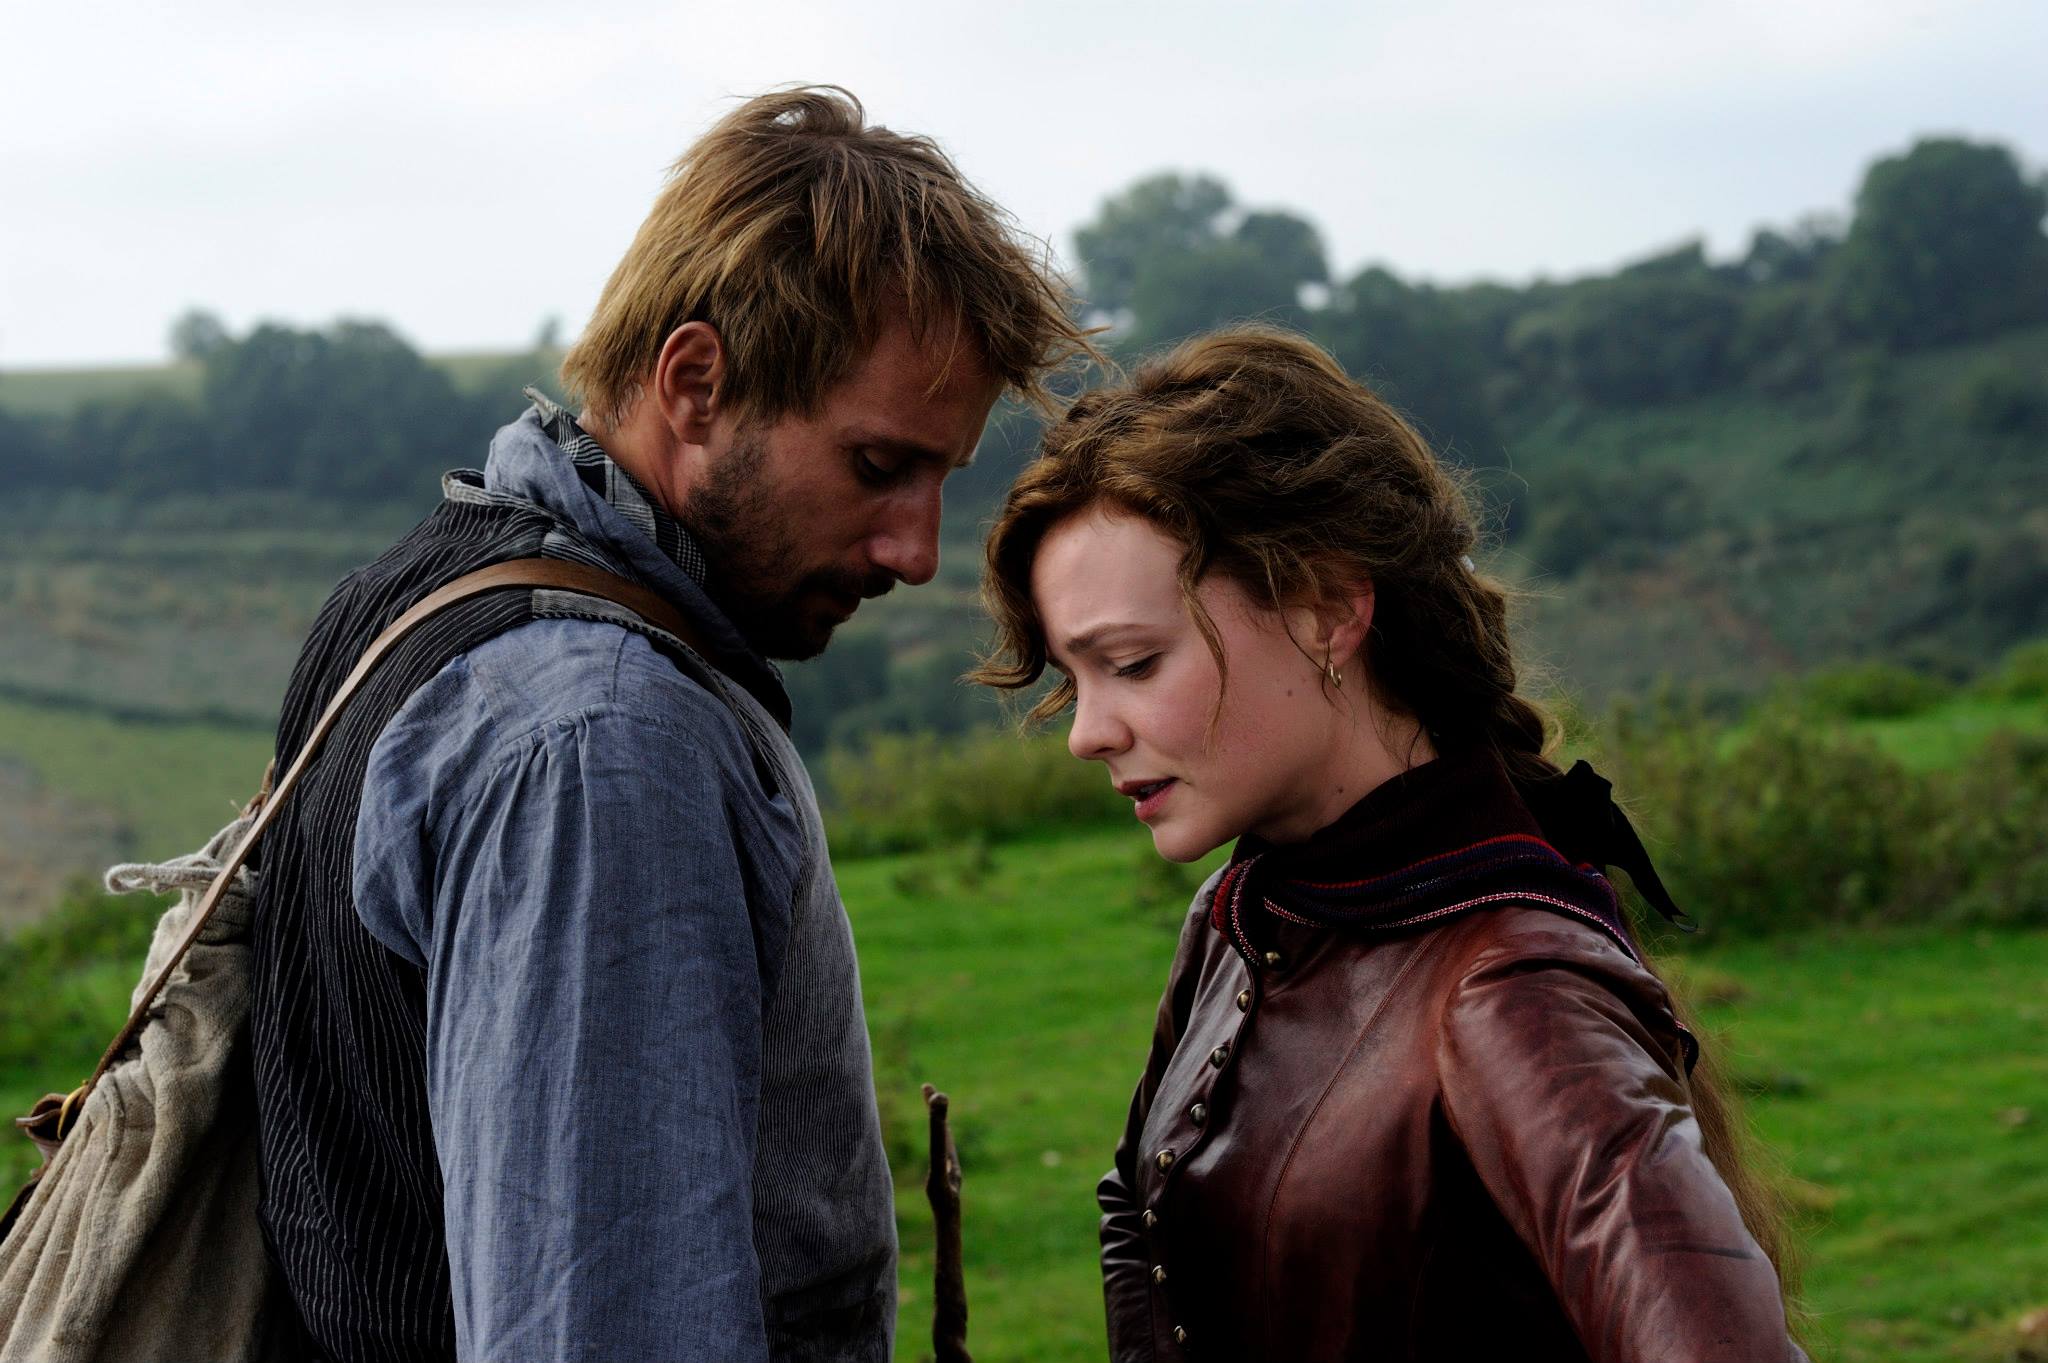 will carrie mulligan be an oscar contender for far from the madding crowd